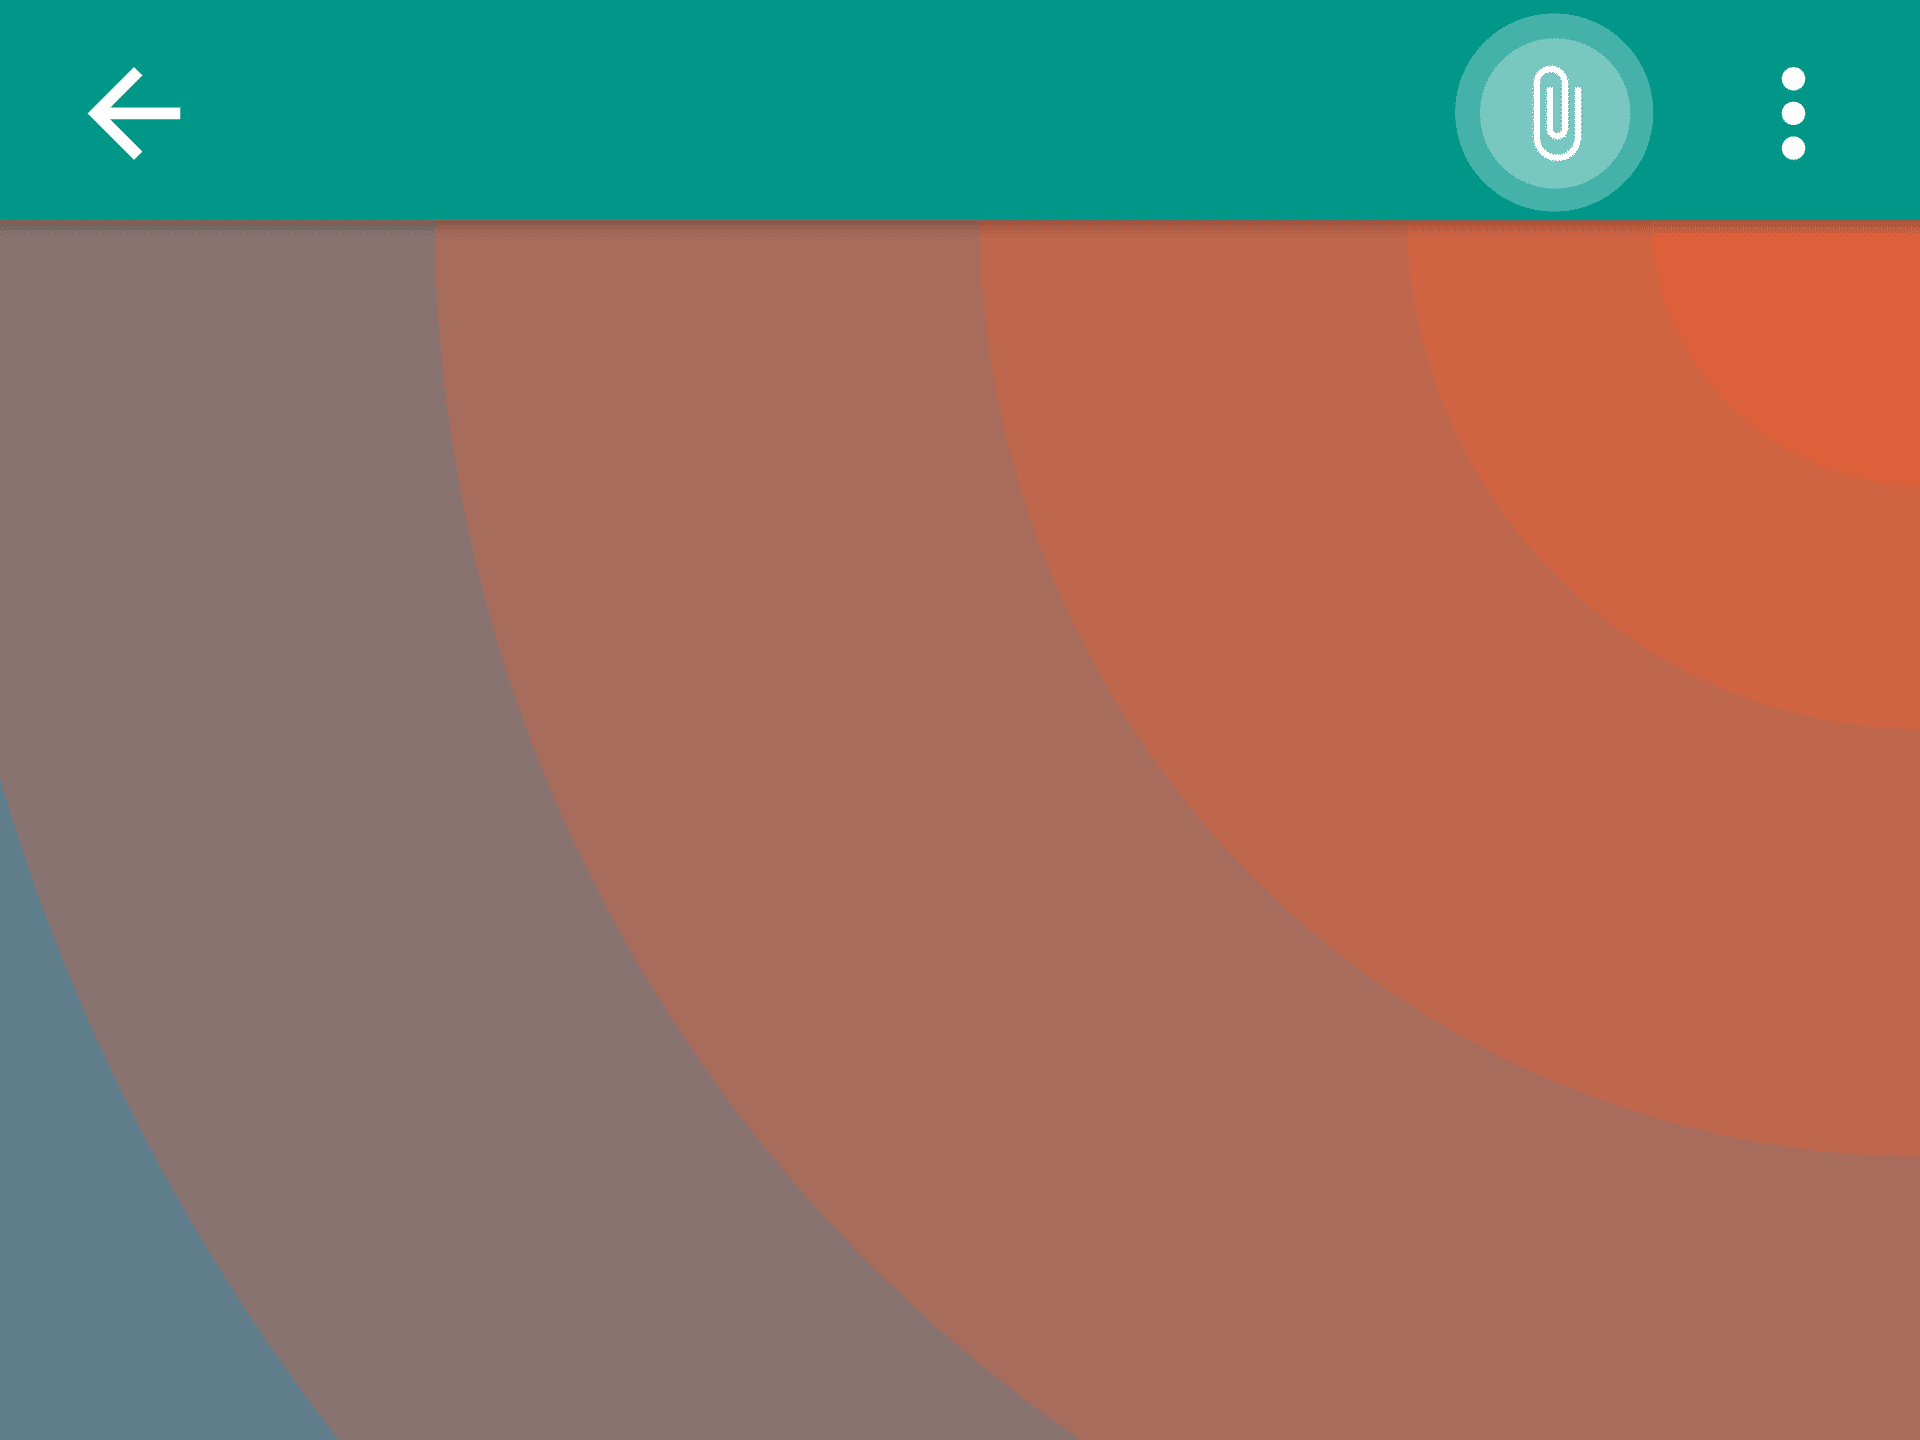 Circular Reveal Effect like WhatsApp in Android